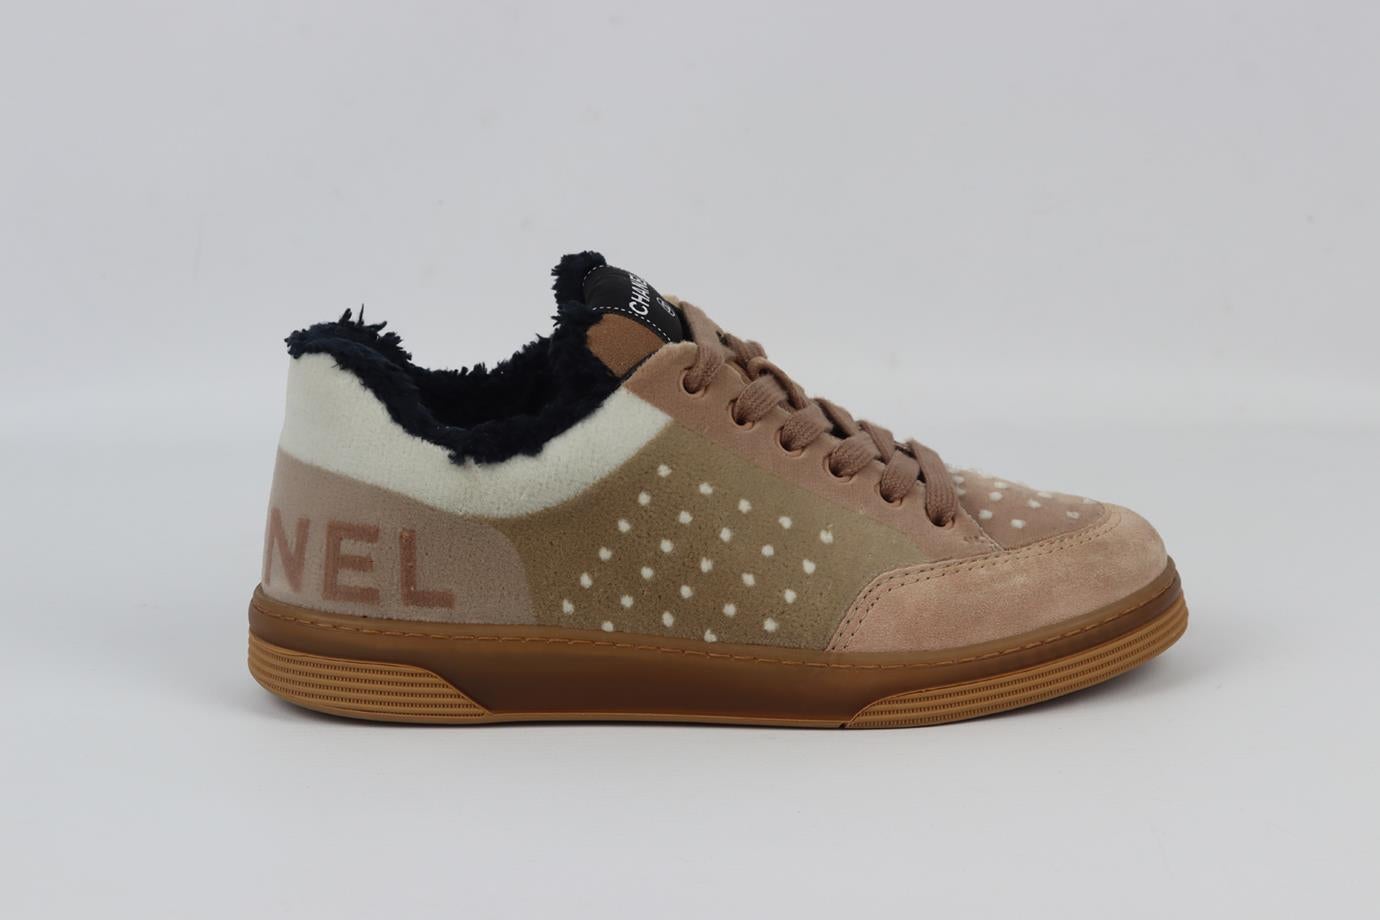 Chanel 2021 faux shearling lined velvet and suede sneakers. Black, beige, white, dusty-pink. Lace up fastening at front. Does not come with dusbtag or box. Size: EU 38.5 (UK 5.5, US 8.5). Insole: 9.6 in. Heel Height: 1 in. Very good condition -